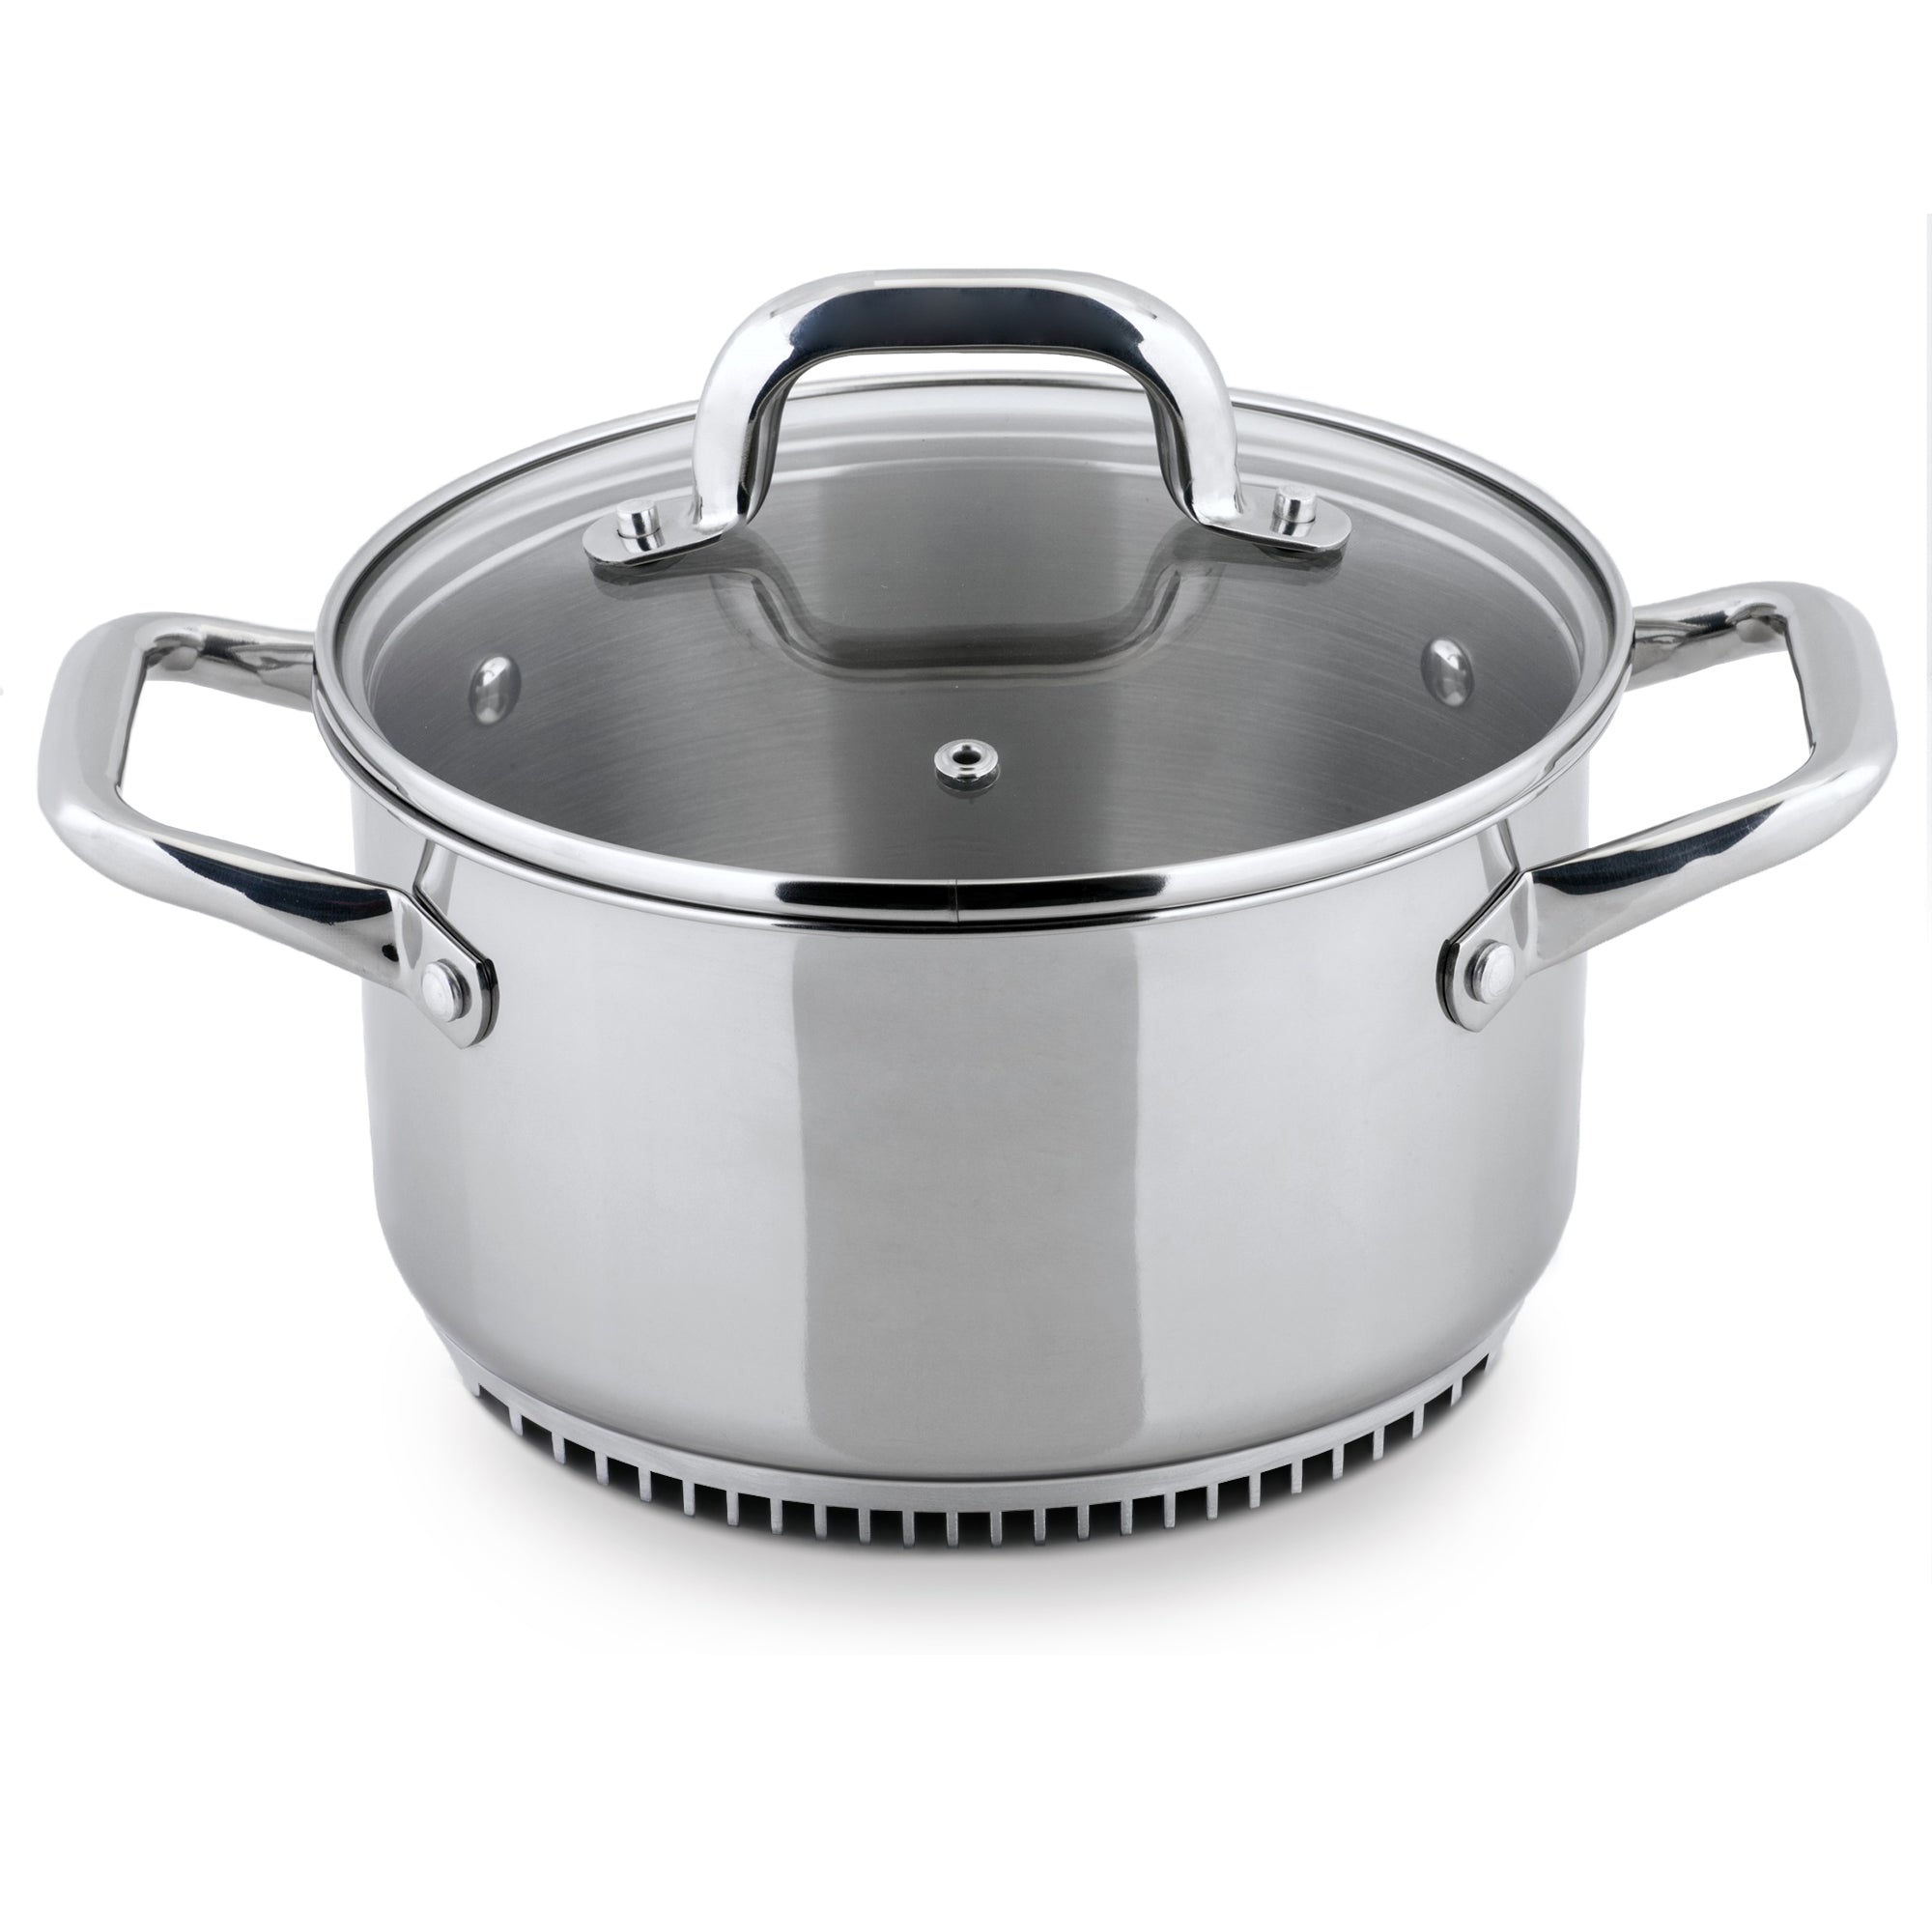 Millvado Stainless Steel Casserole Pot, Small Steel Dutch Oven , Medium  Boiling Pot for Soup, Spaghetti, Braising , 3.5 Quart Induction Cooking Pot  